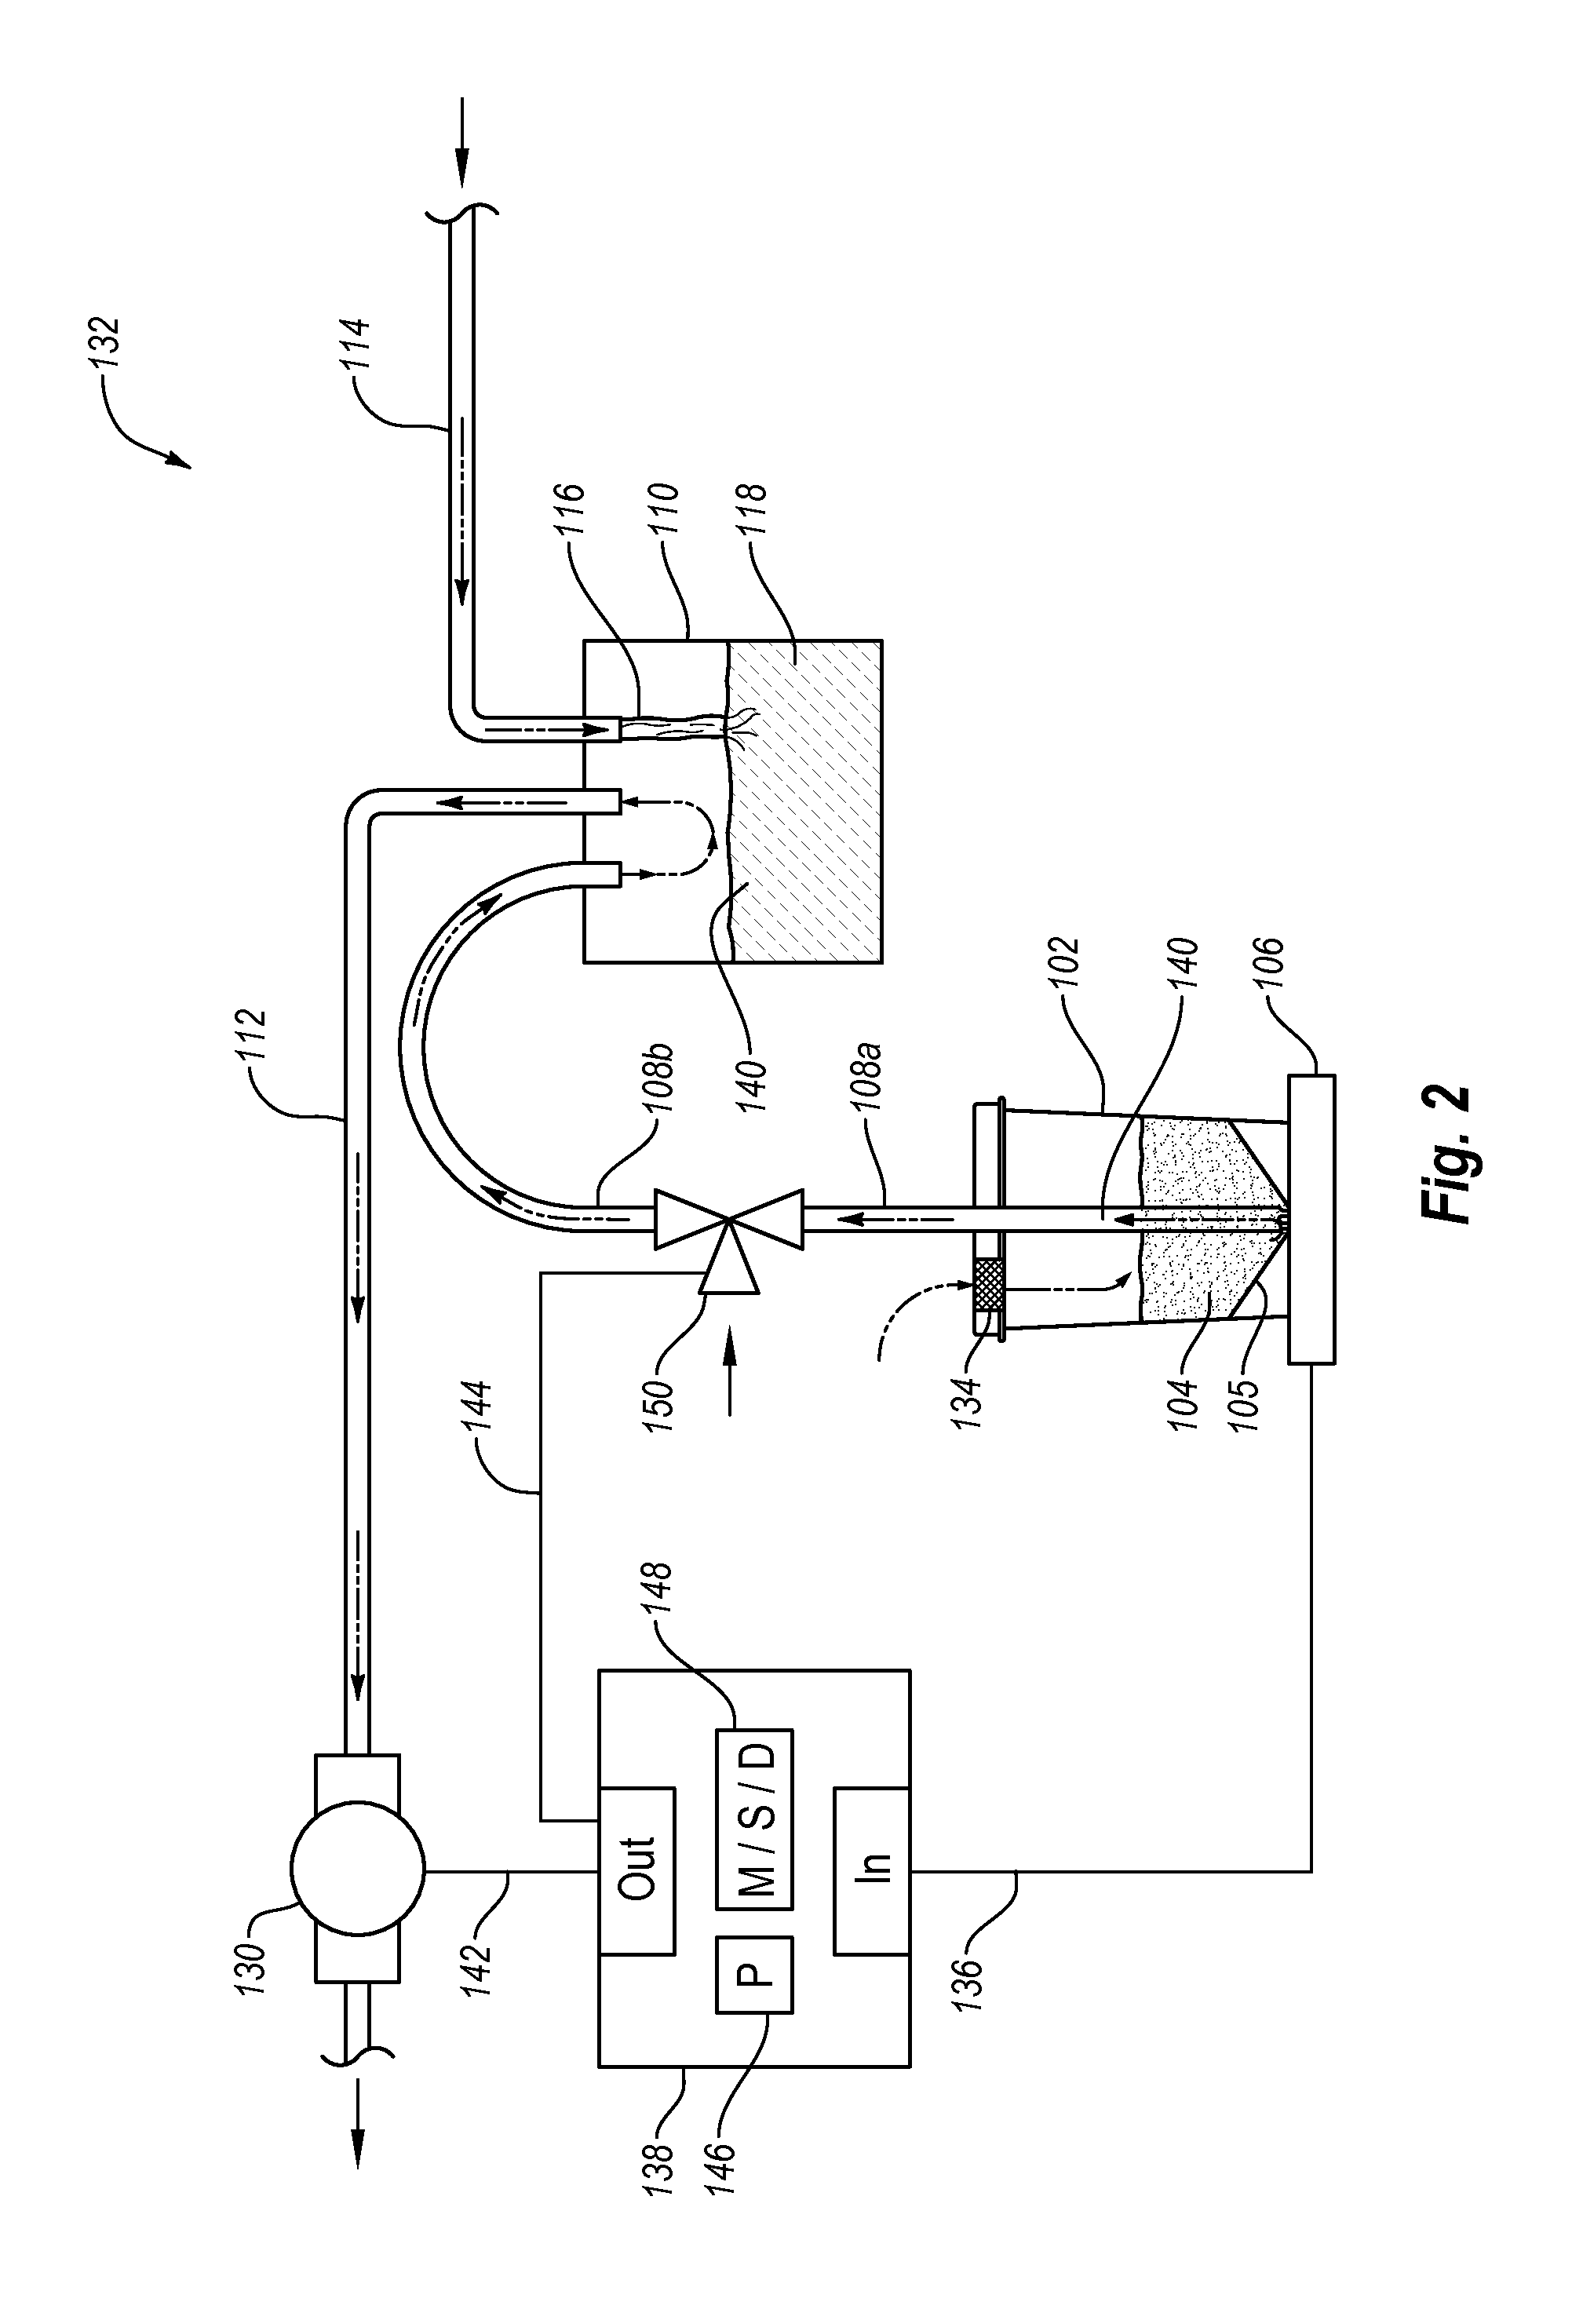 Chemical solution mixing and dispensing apparatus